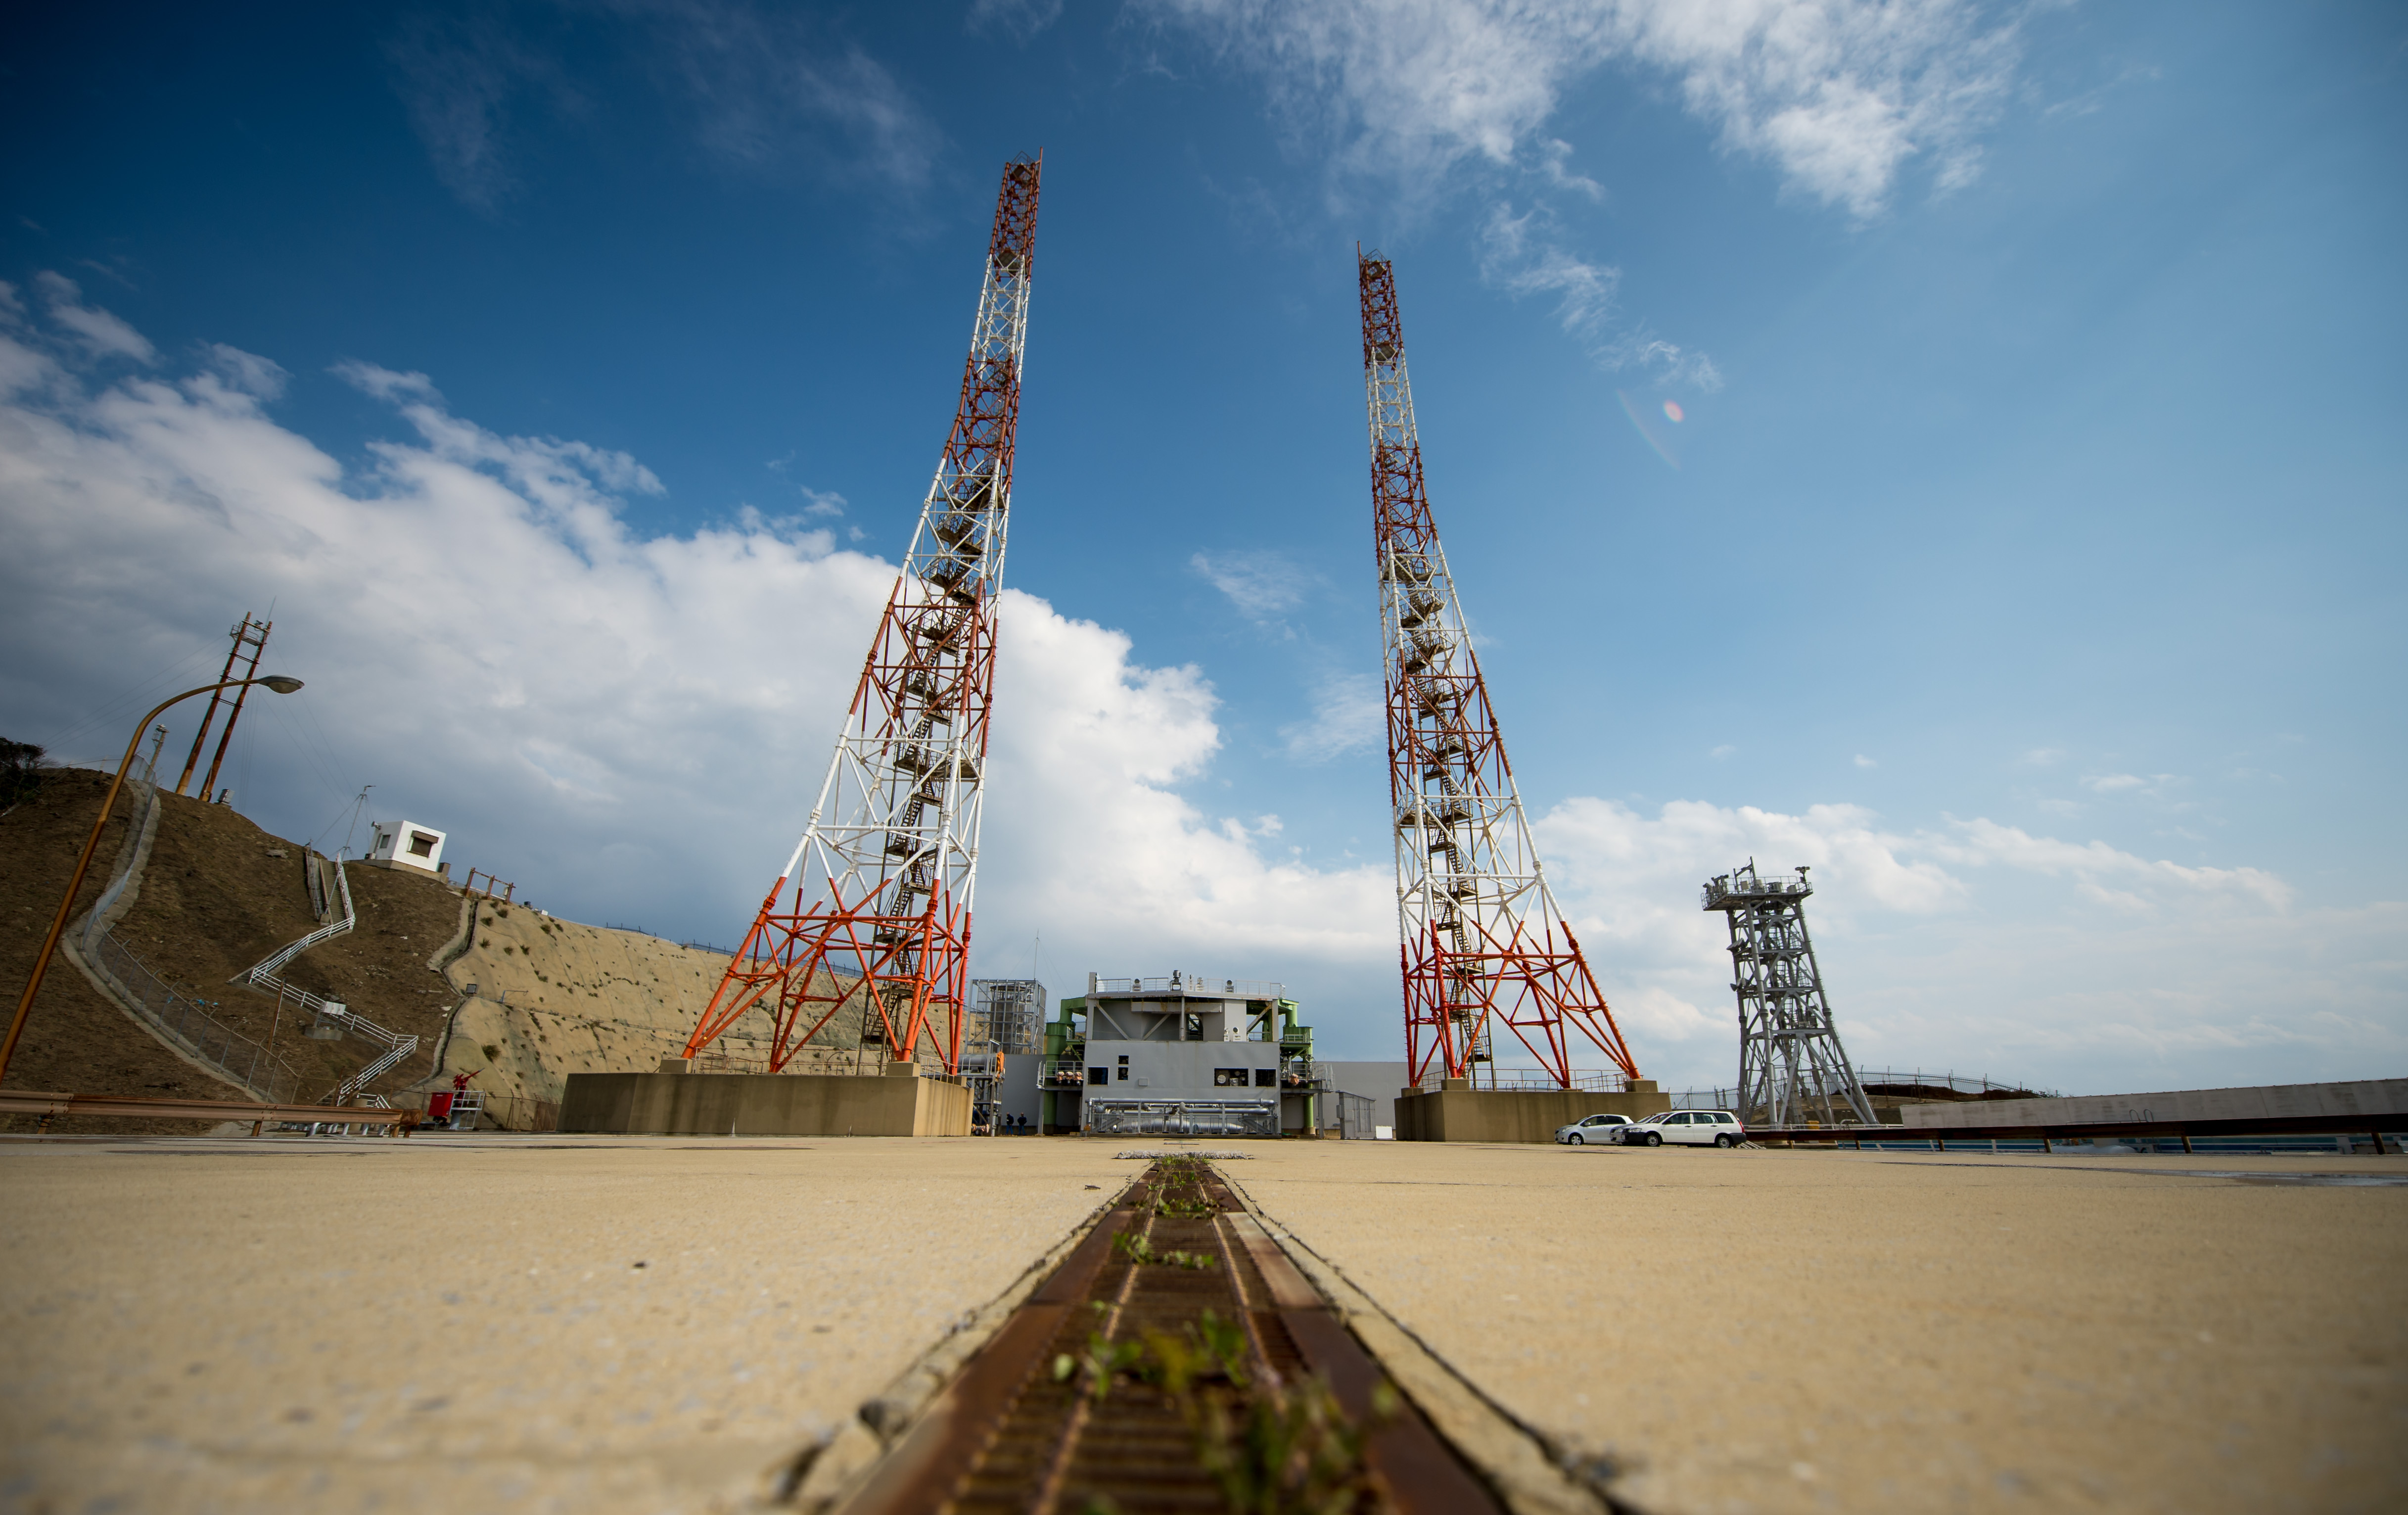 GPM Launch Site at Tanegashima Space Center